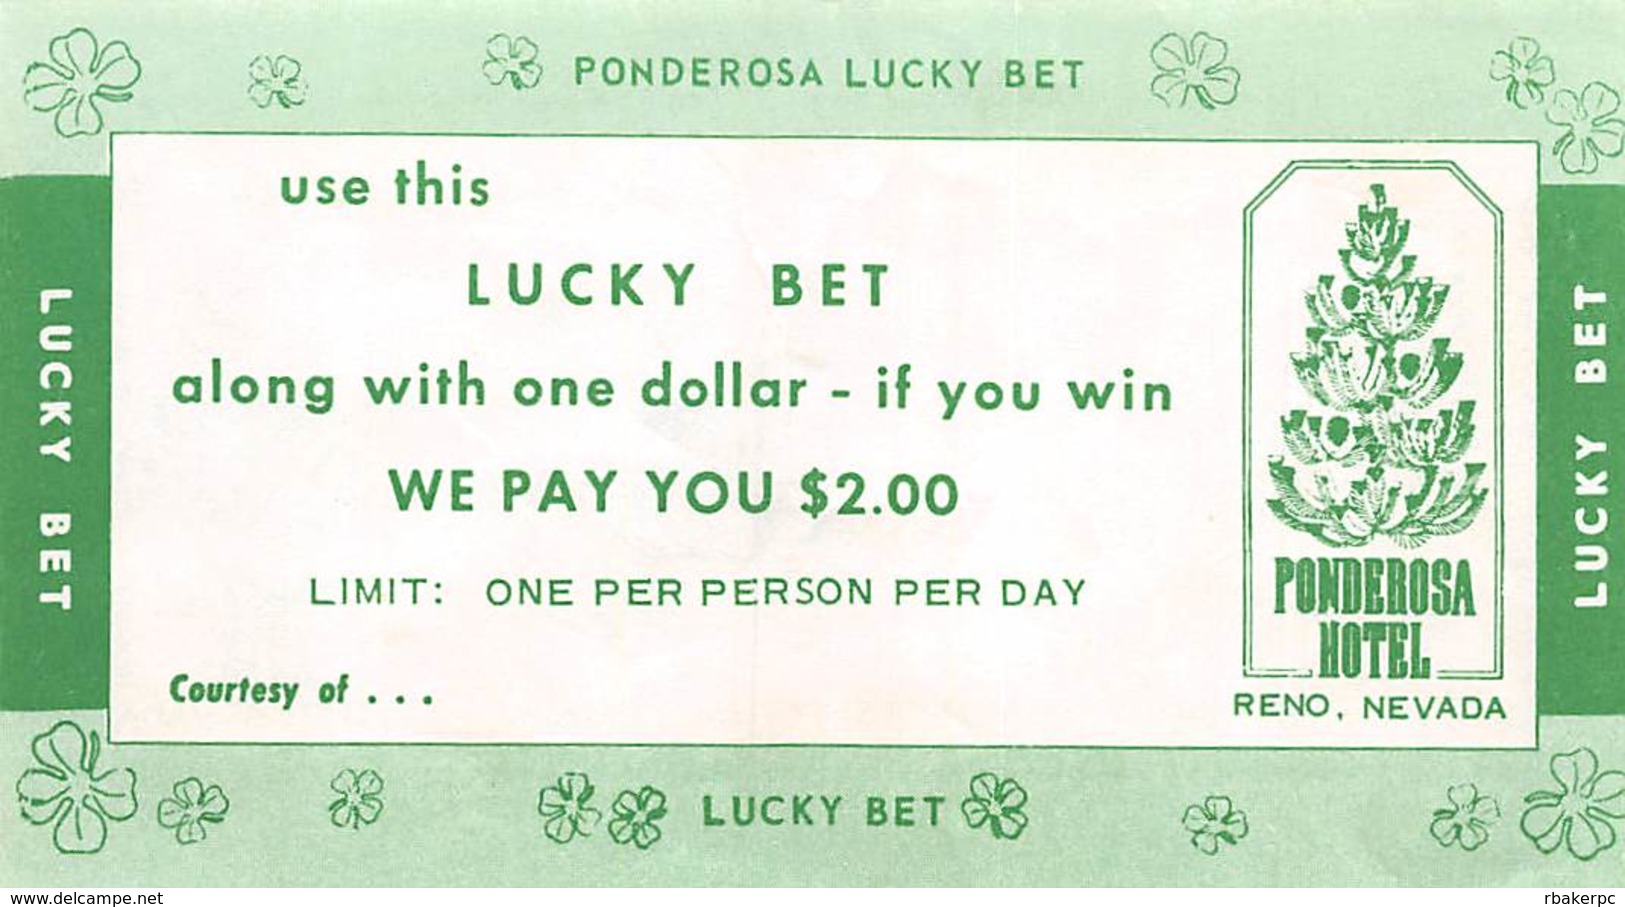 Ponderosa Hotel Casino - Reno, NV - 2 For 1 Lucky Bet Match Play Coupon - Advertising